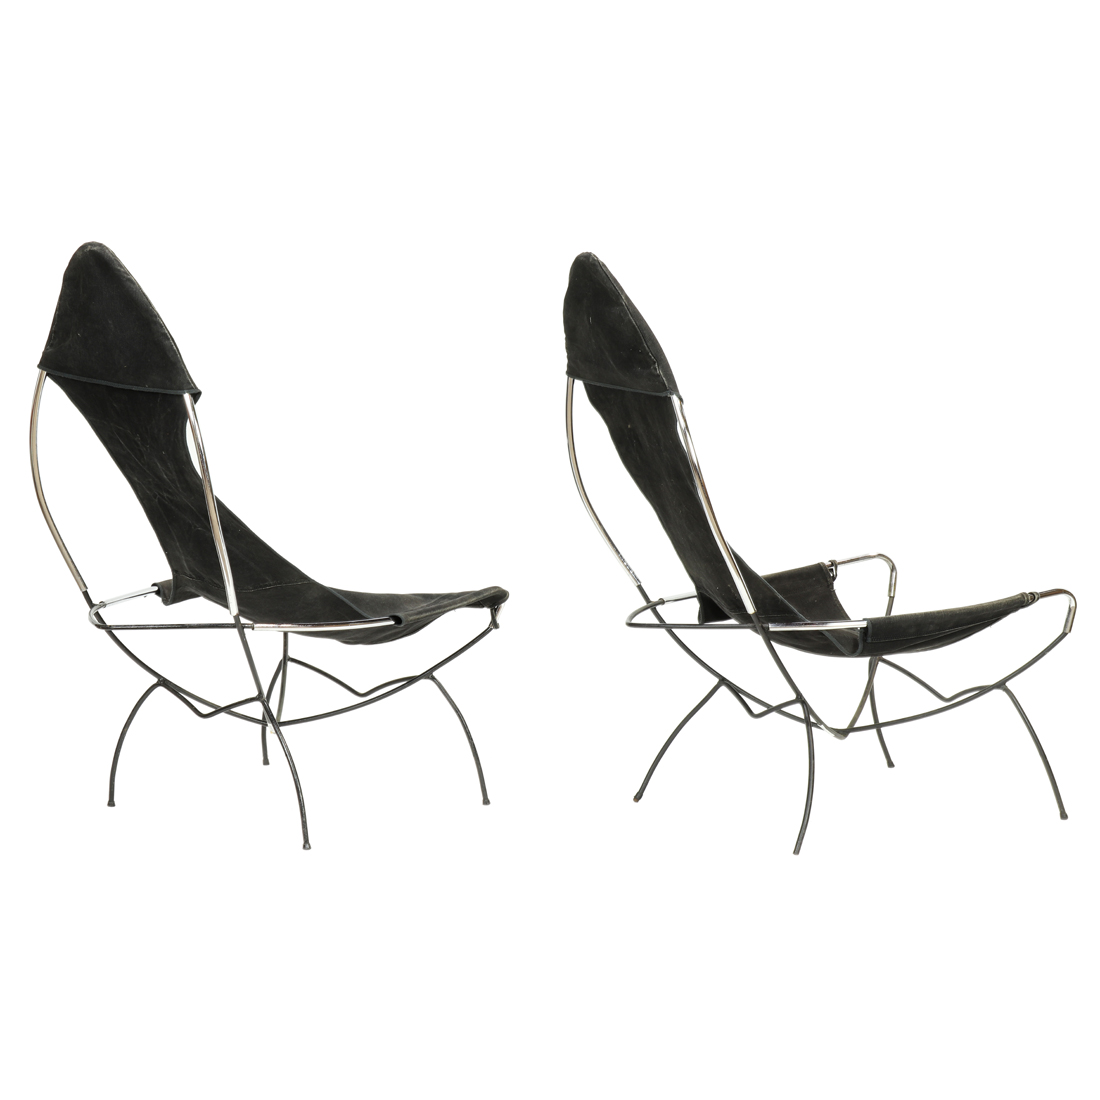 A PAIR OF TONY PAUL SLING CHAIRS 3a39b6